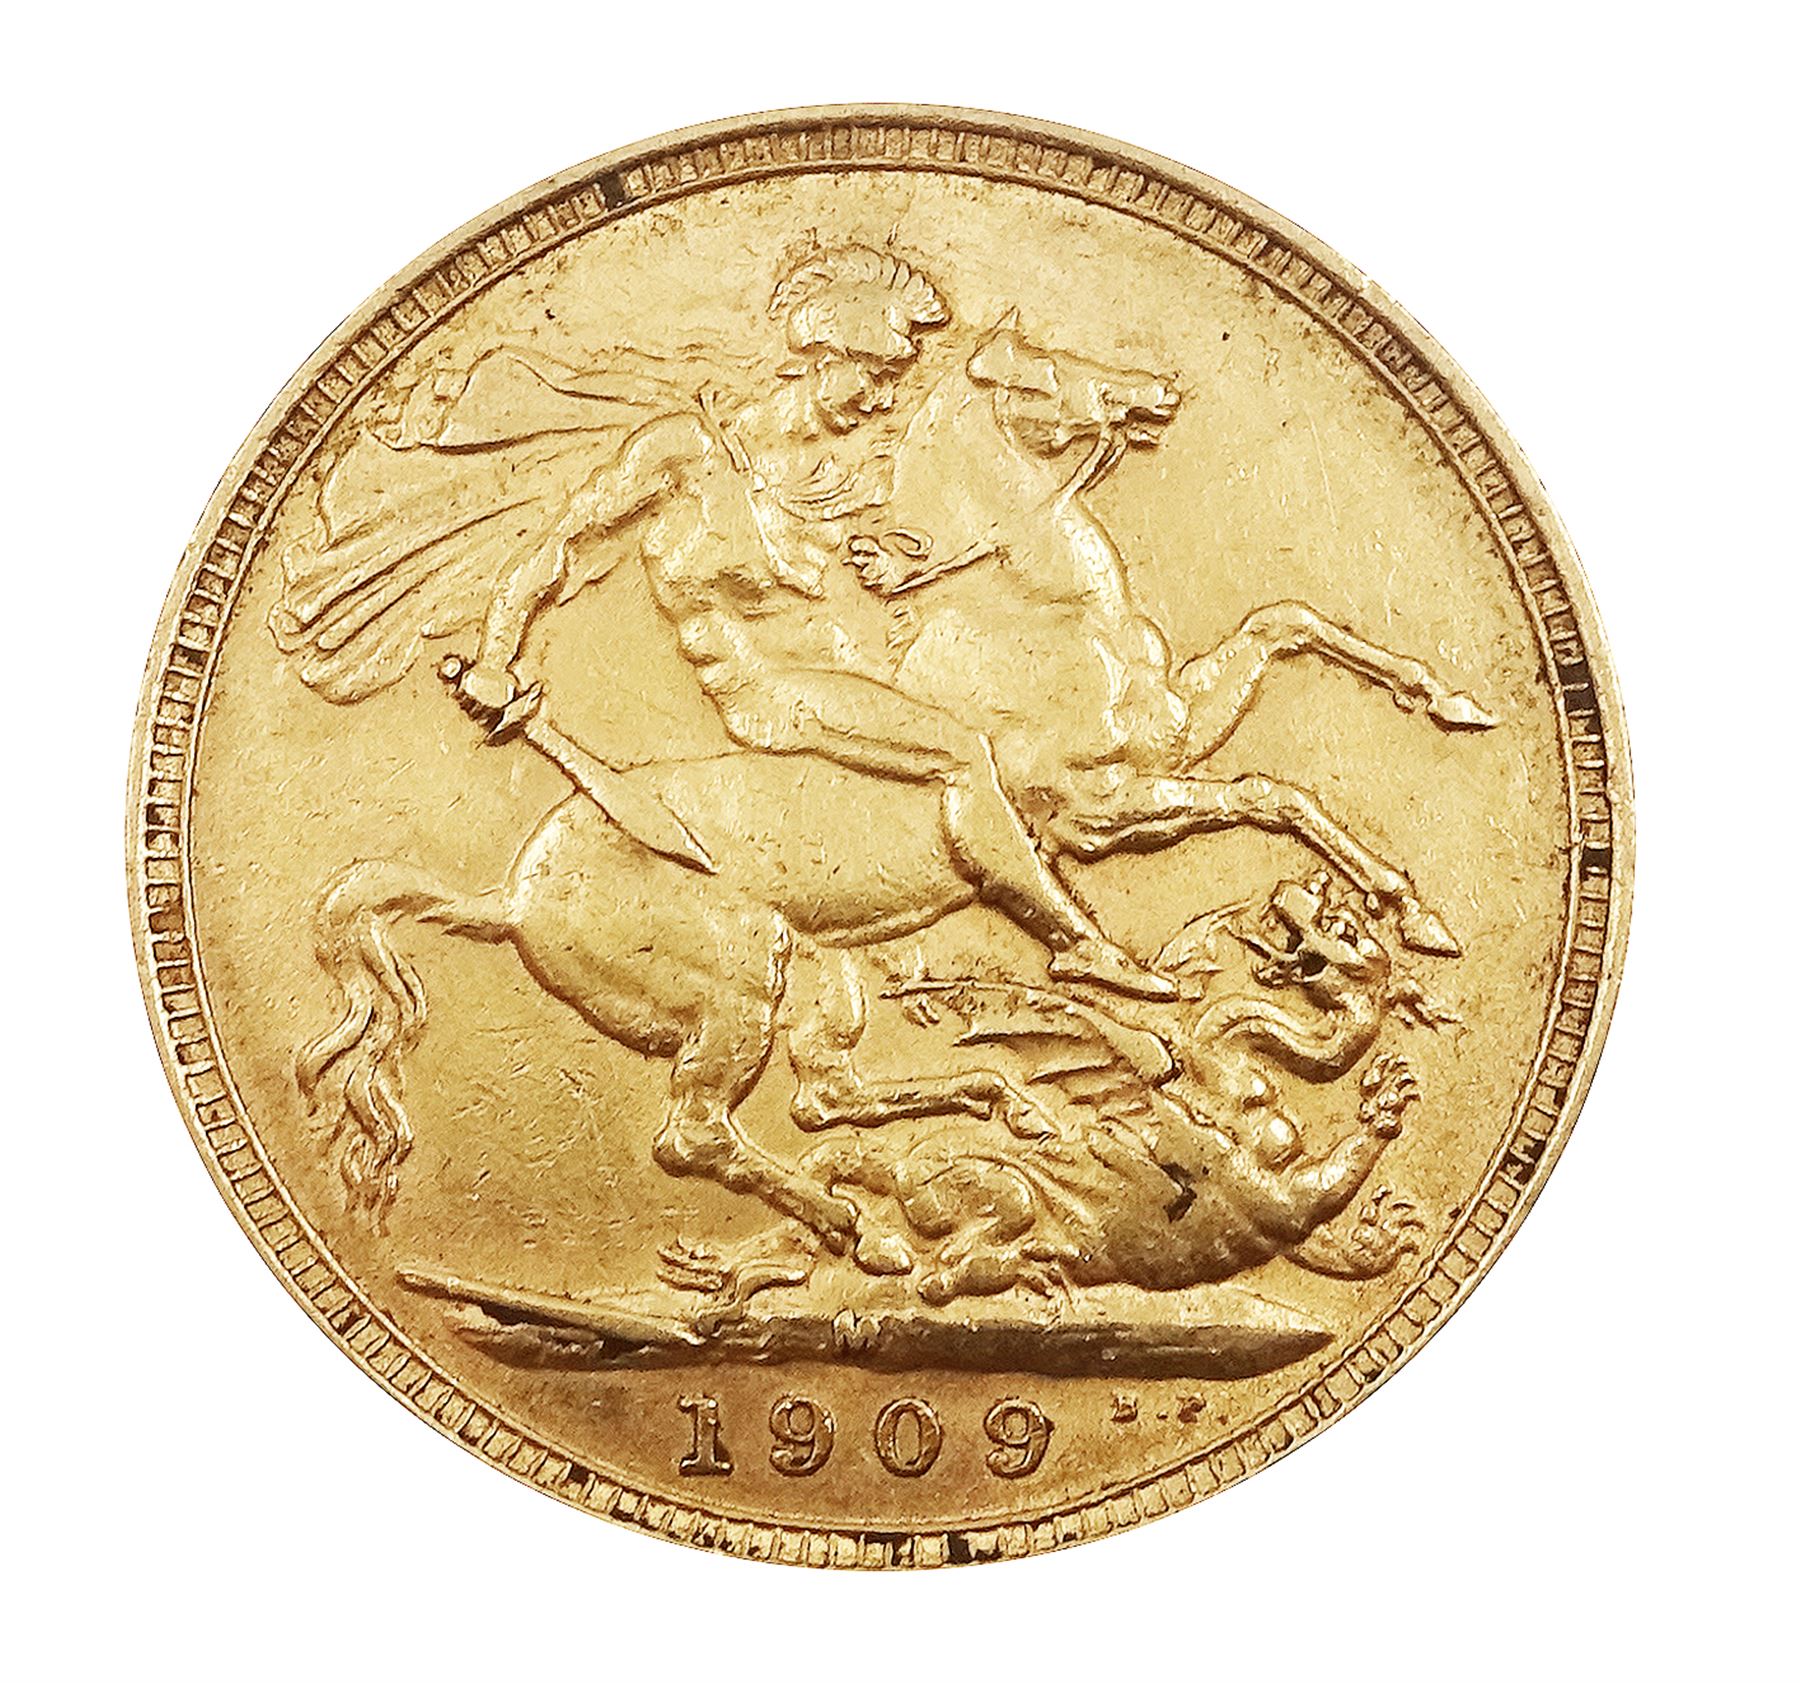 King Edward VII 1909 gold full sovereign coin - Image 2 of 2